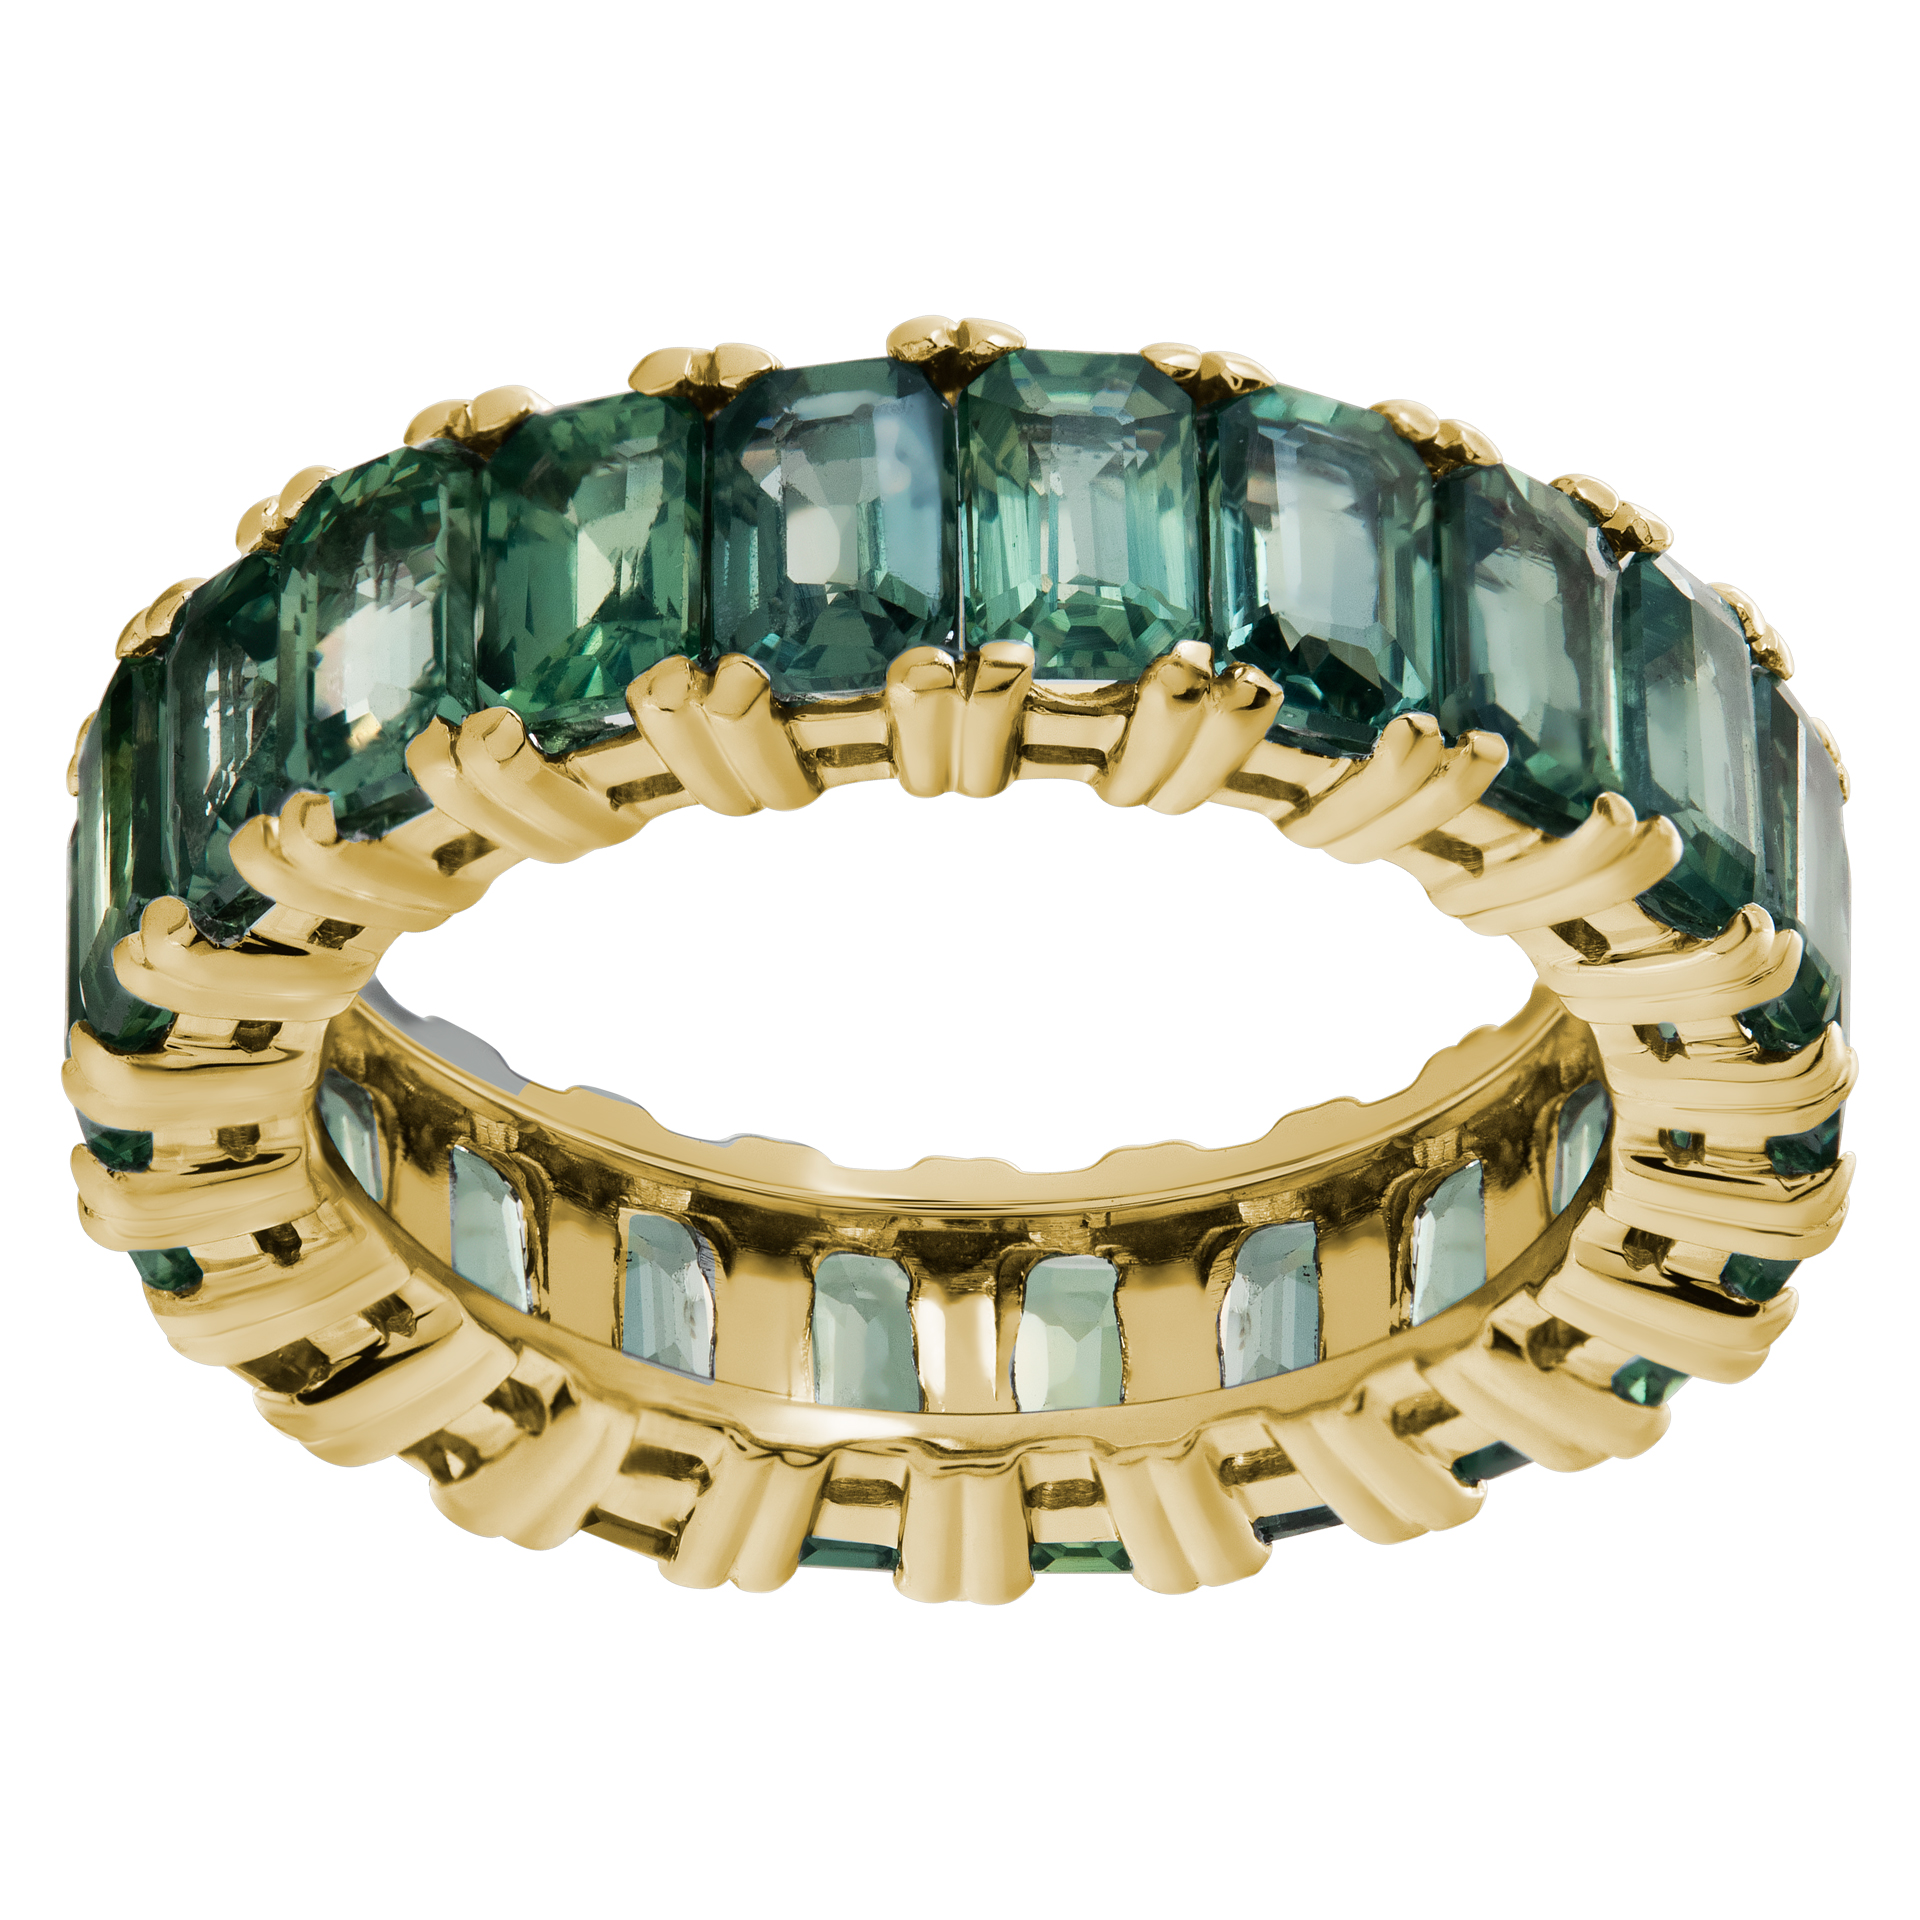 Green sapphire eternity band in 14k yellow gold